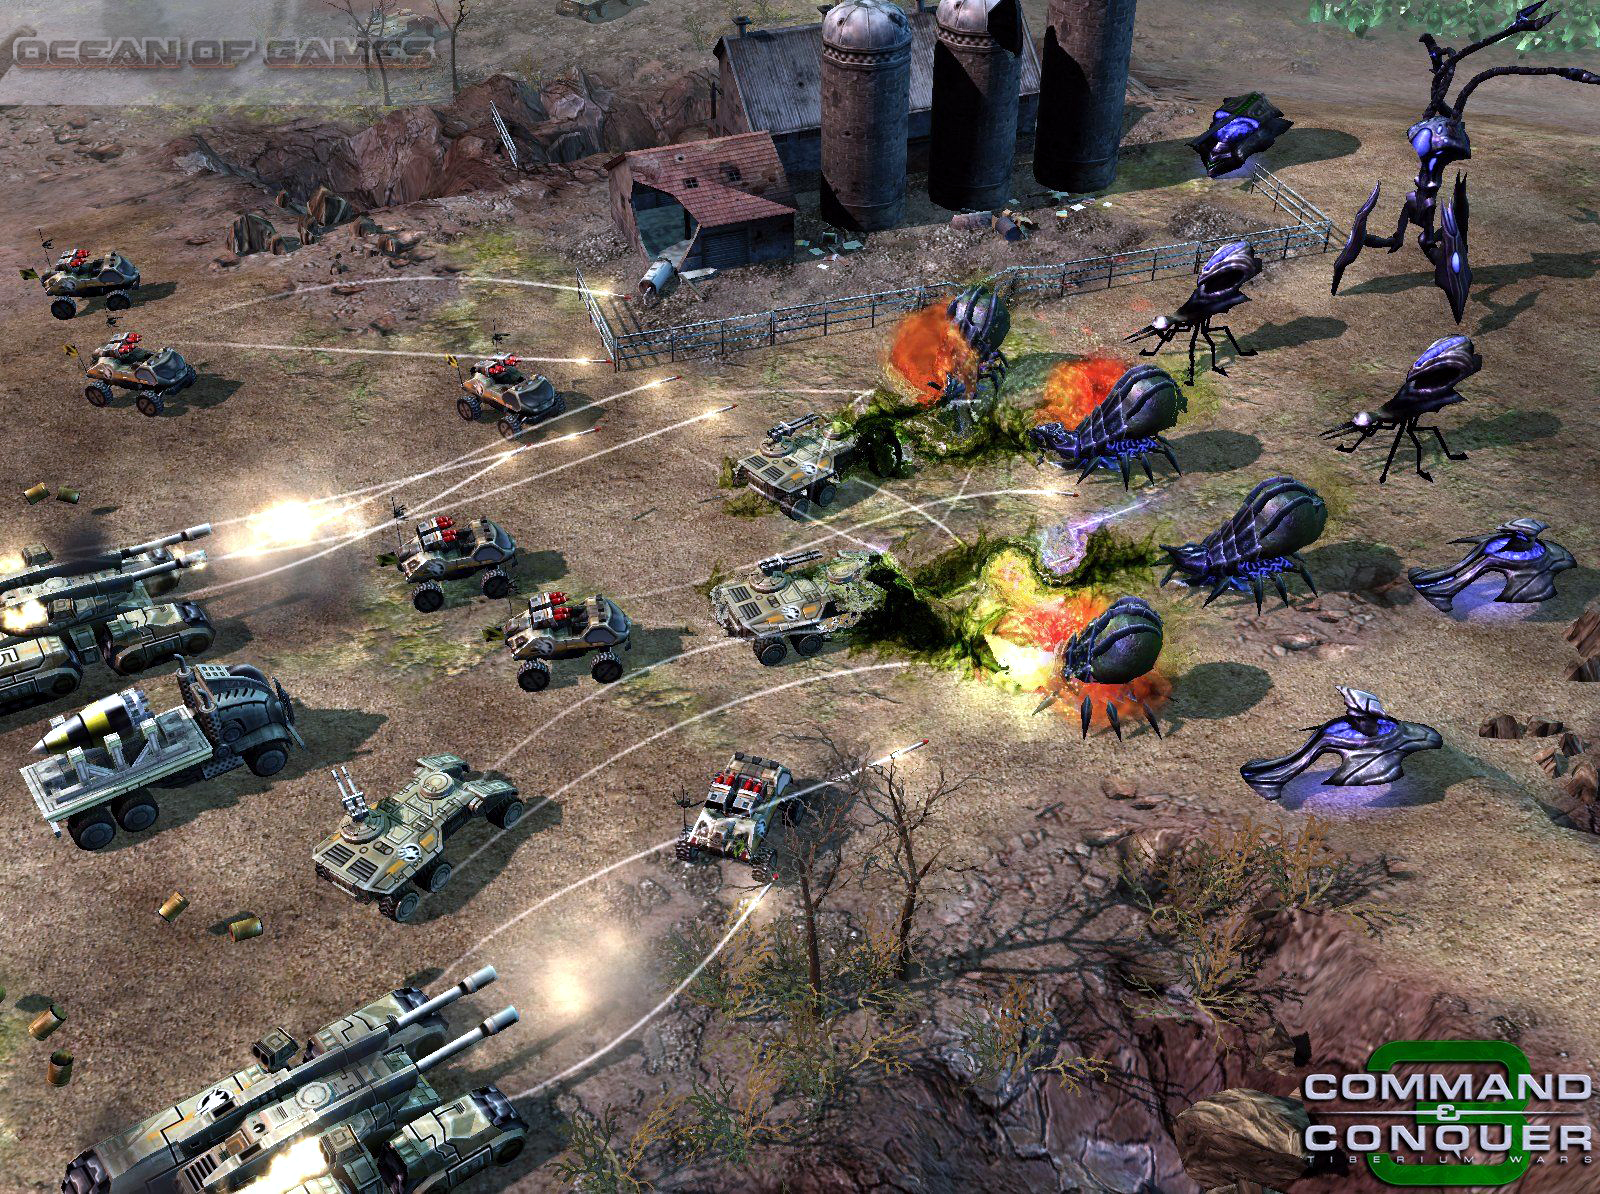 Command and conquer free download